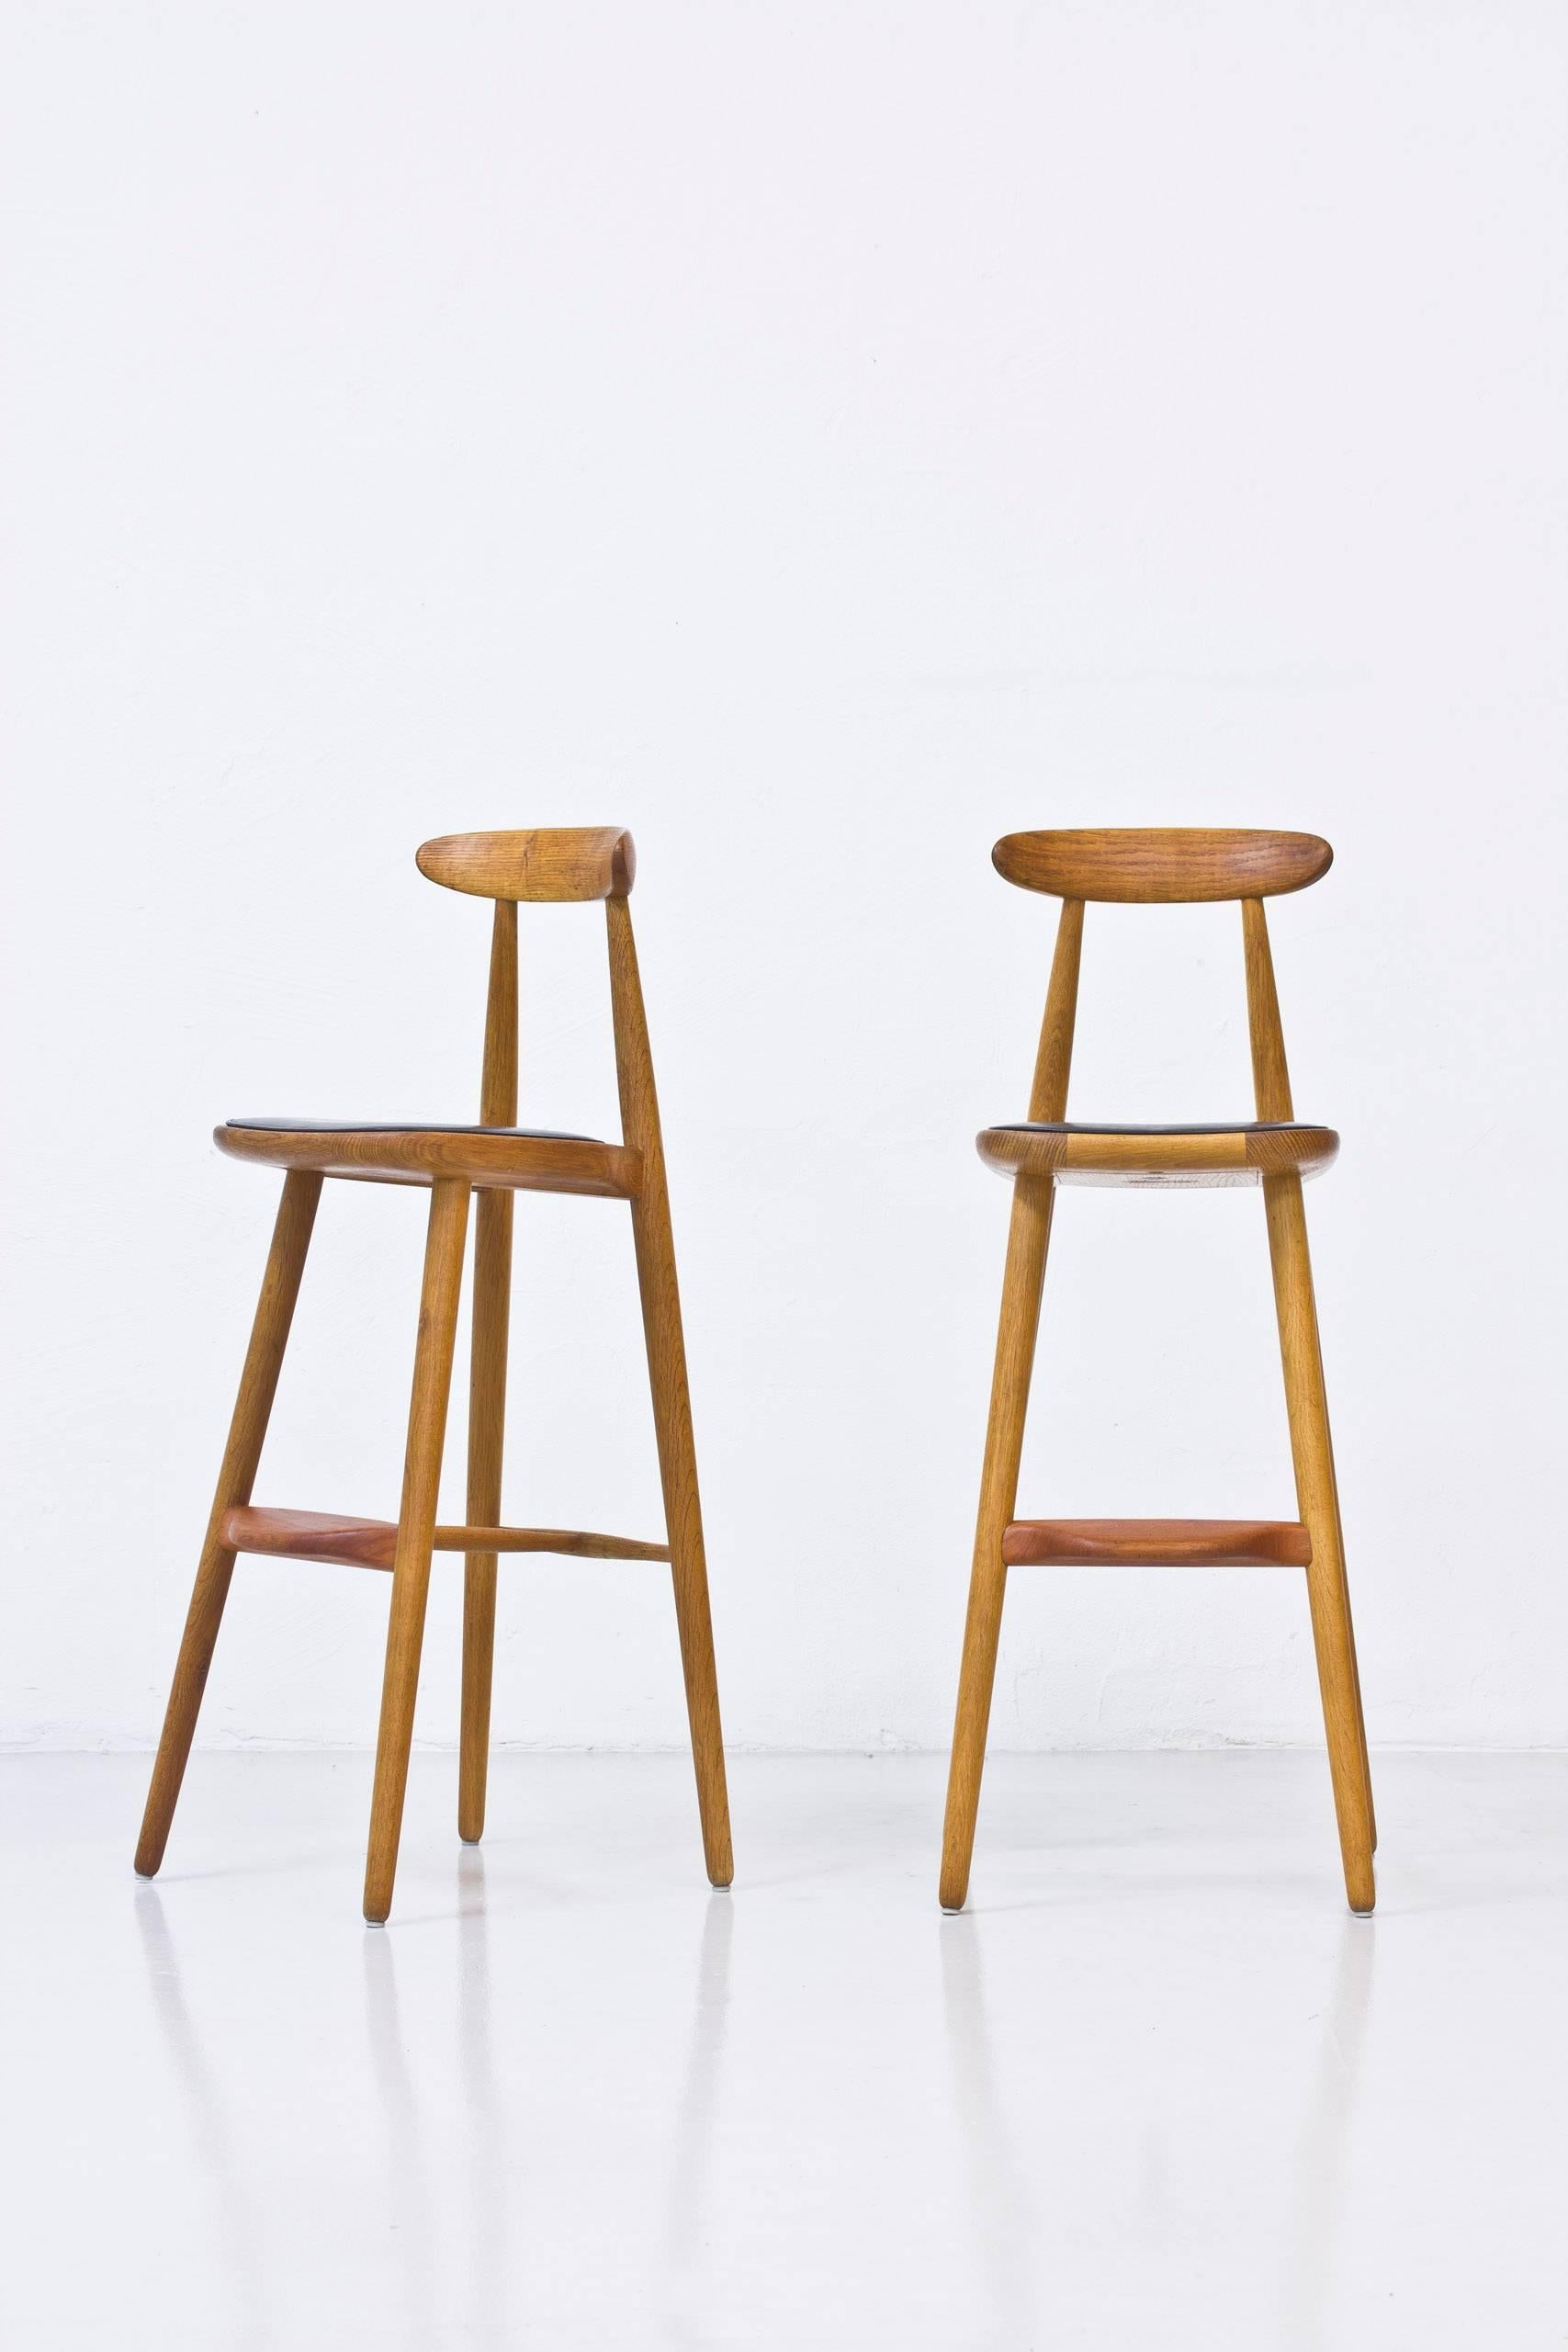 Very rare bar stools designed by Danish architect Wilhelm Wohlert. Produced in Denmark by Stolefabriken in Odense during the 1950s. Solid oak with teak footrest and original black leather seats. Excellent original condition with very few signs of